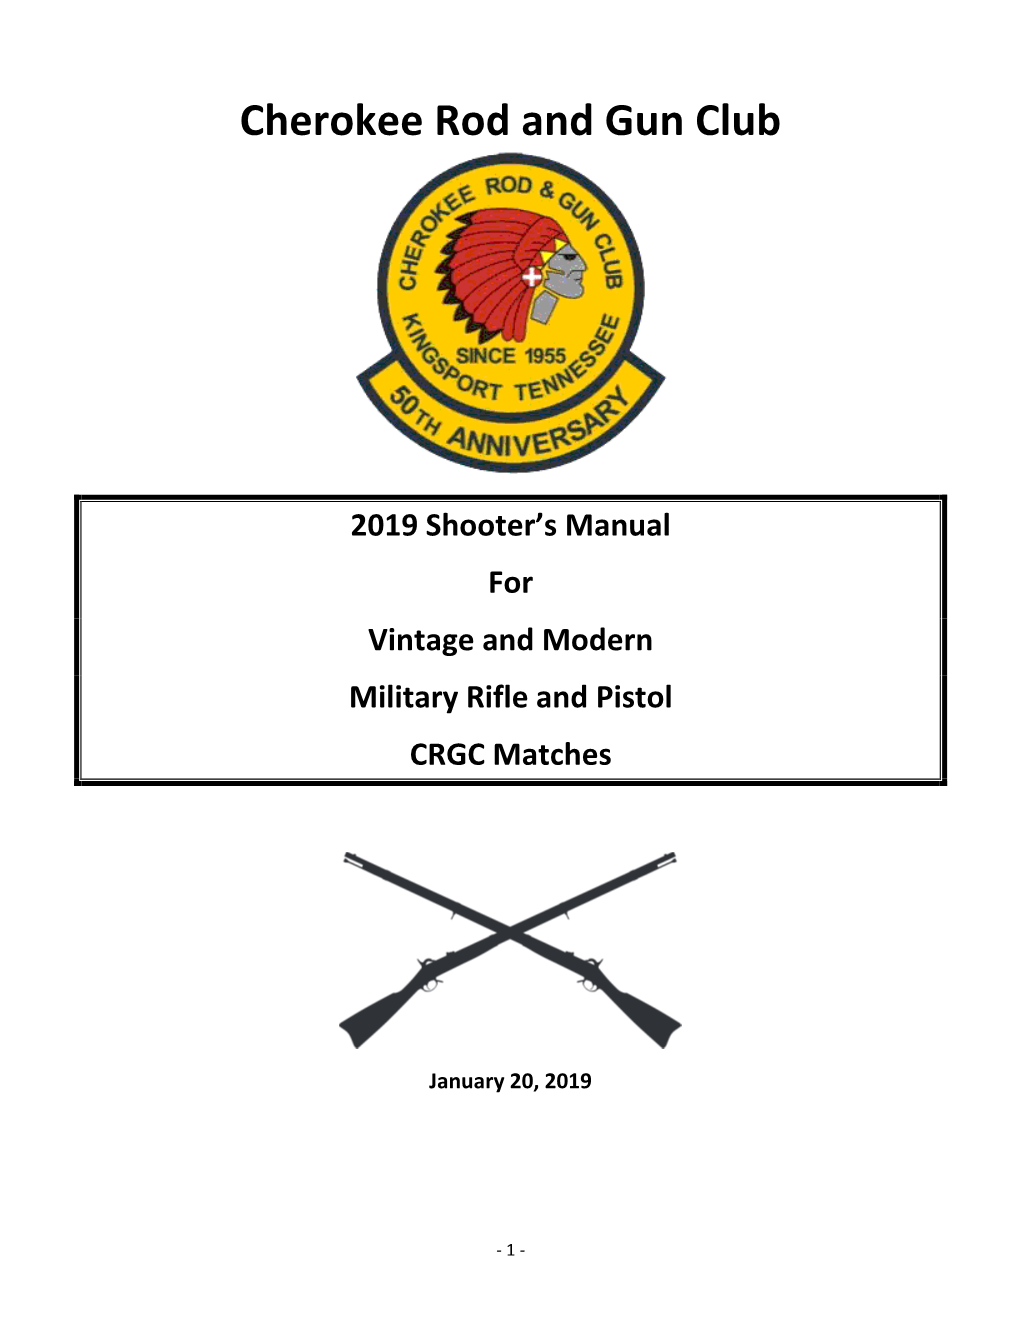 Cherokee Rod and Gun Club 2019 Shooter's Manual for Vintage And